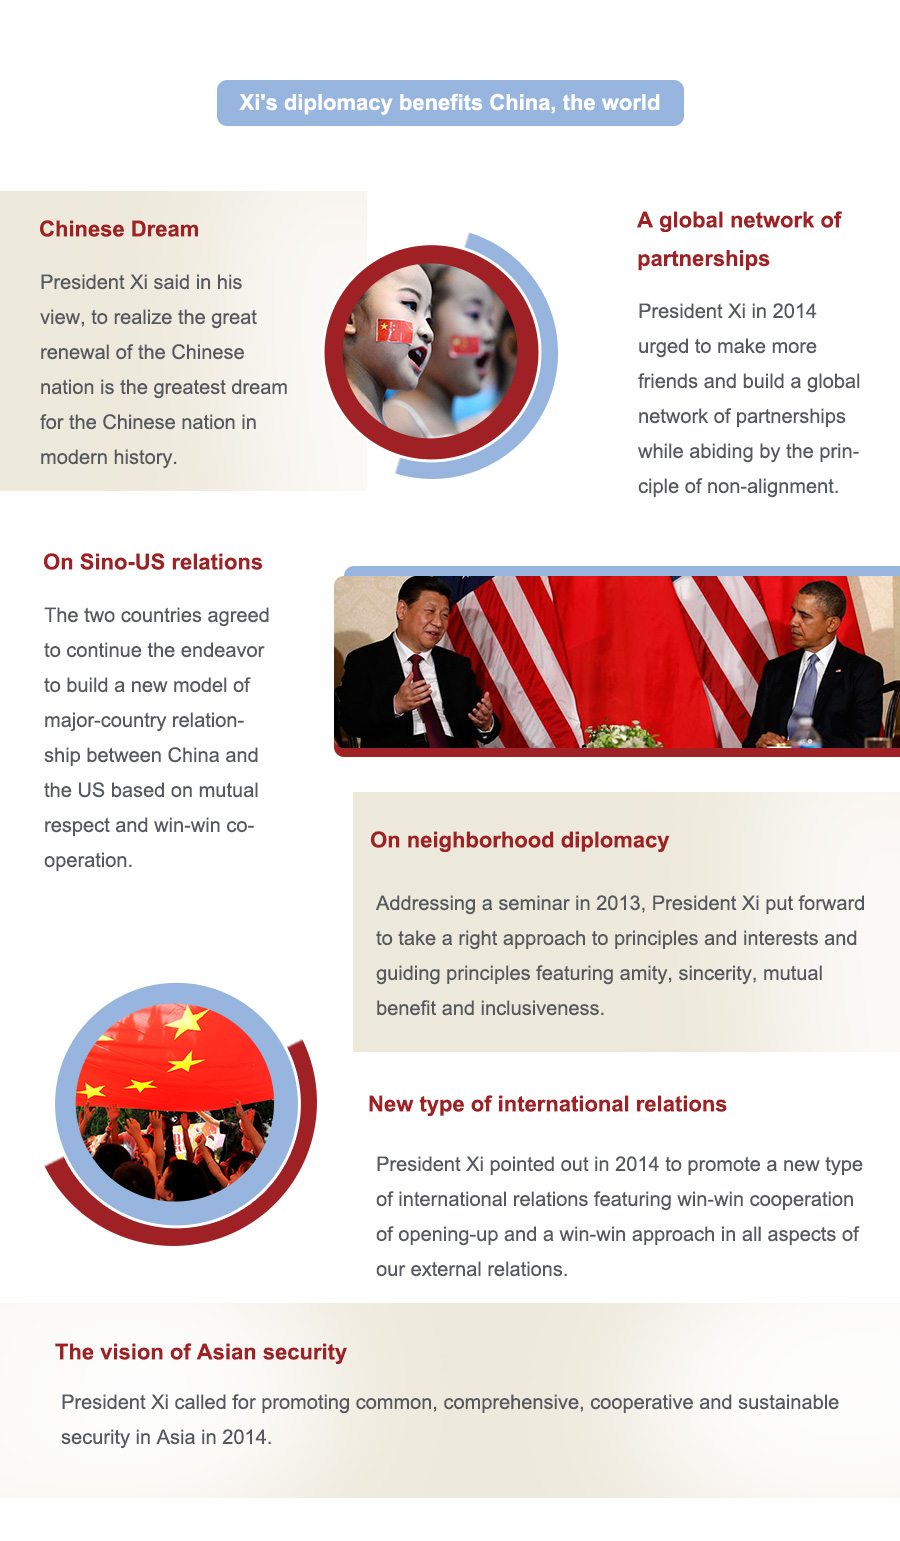 Xi-style diplomacy during past three years